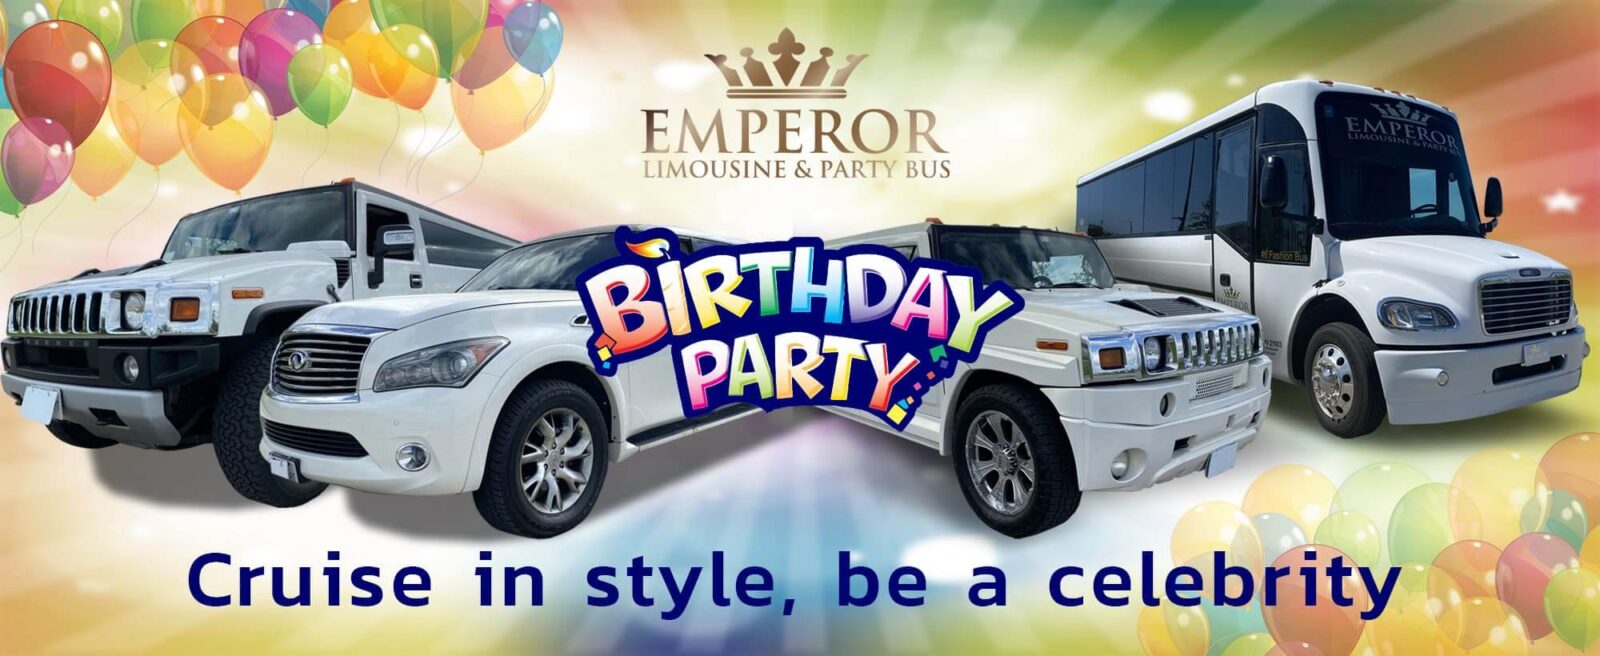 Party buses for birthdays